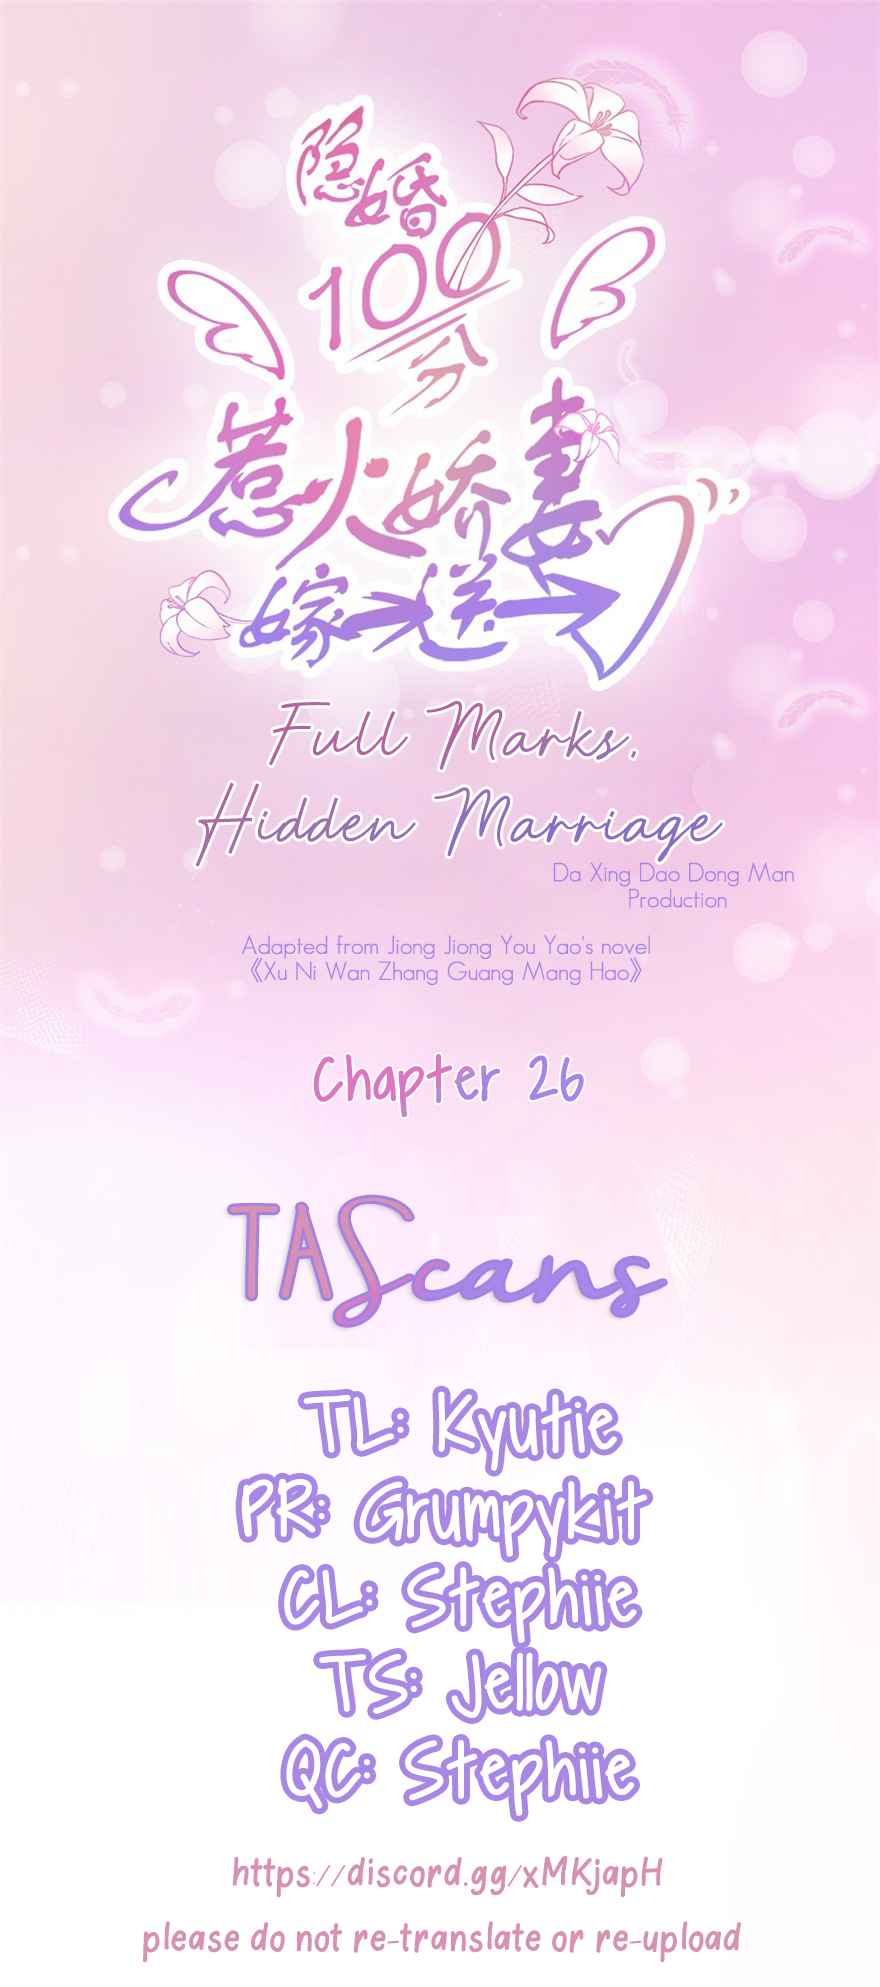 Full Marks, Hidden Marriage Ch. 26 Jealousy of Father and Son